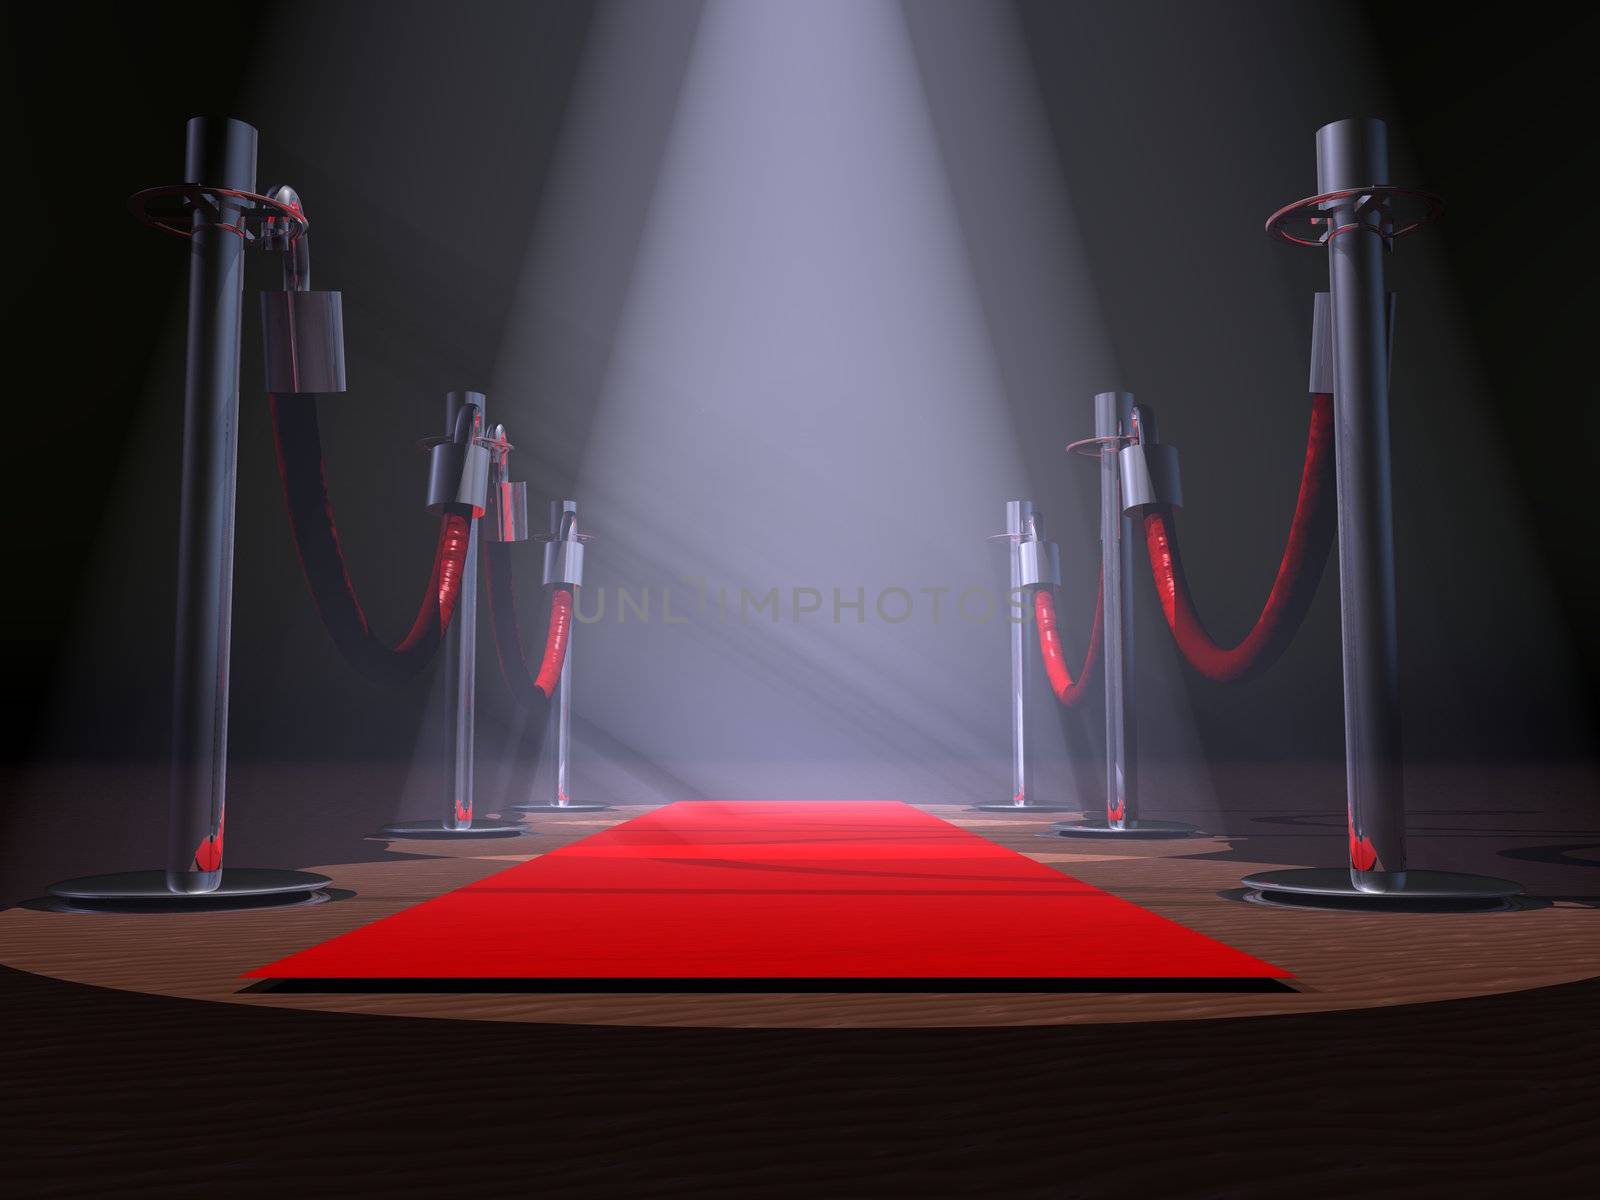 A red carpet with stanchions and spot lights.